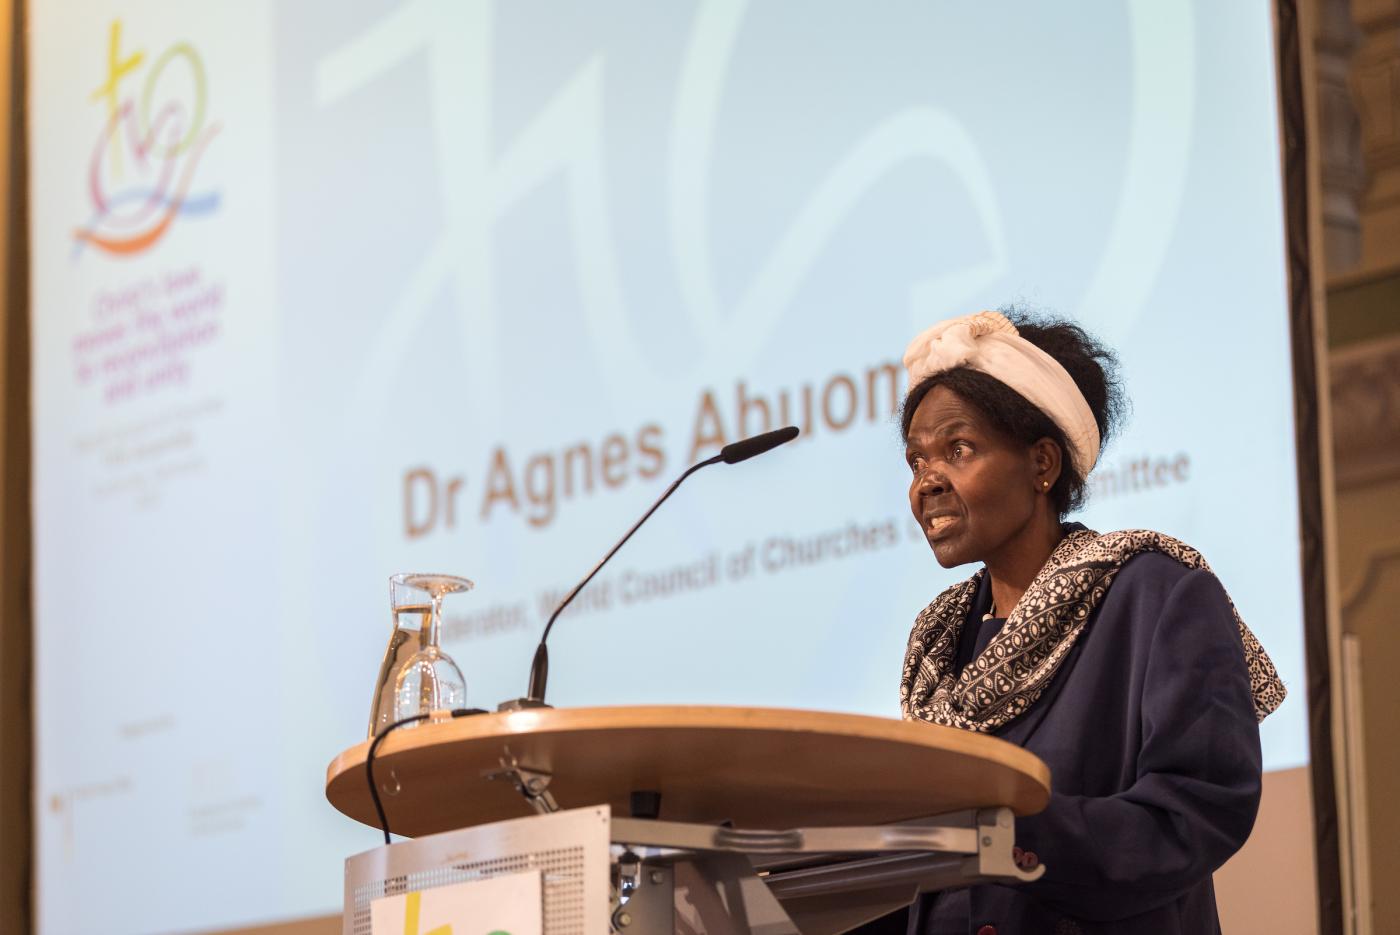 WCC moderator Dr Agnes Abuom, Photo: Albin Hillert/WCC